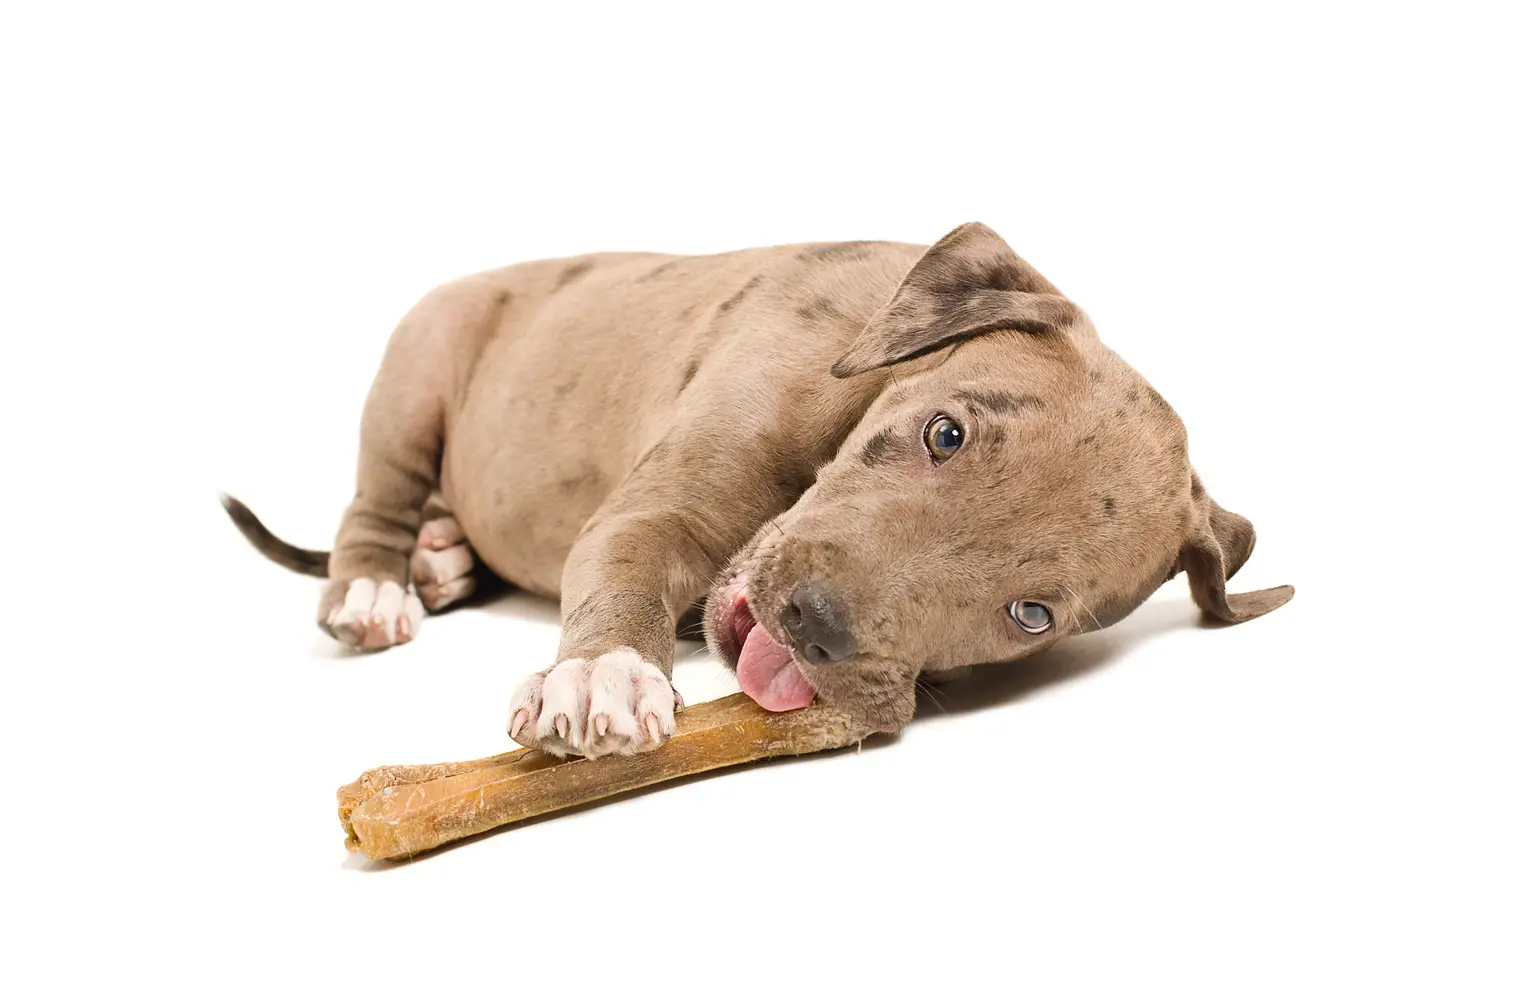 The Best Dog Food for Pitbulls | Reviews and Ratings of the Top Wet and Dry Brands